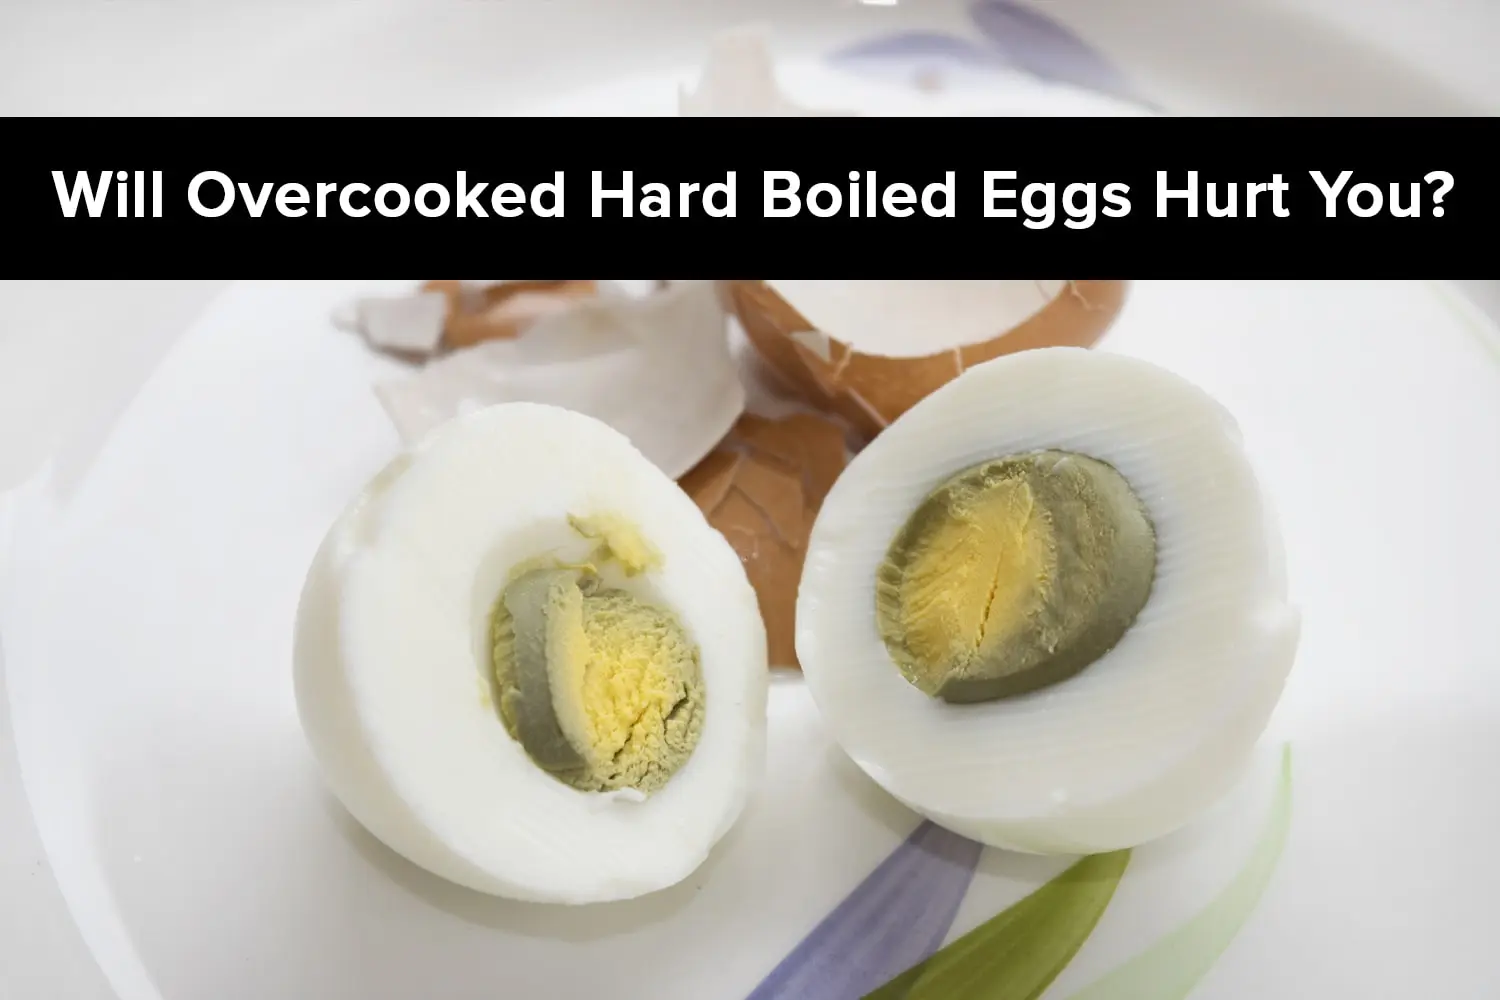 Will Overcooked Hard Boiled Eggs Hurt You